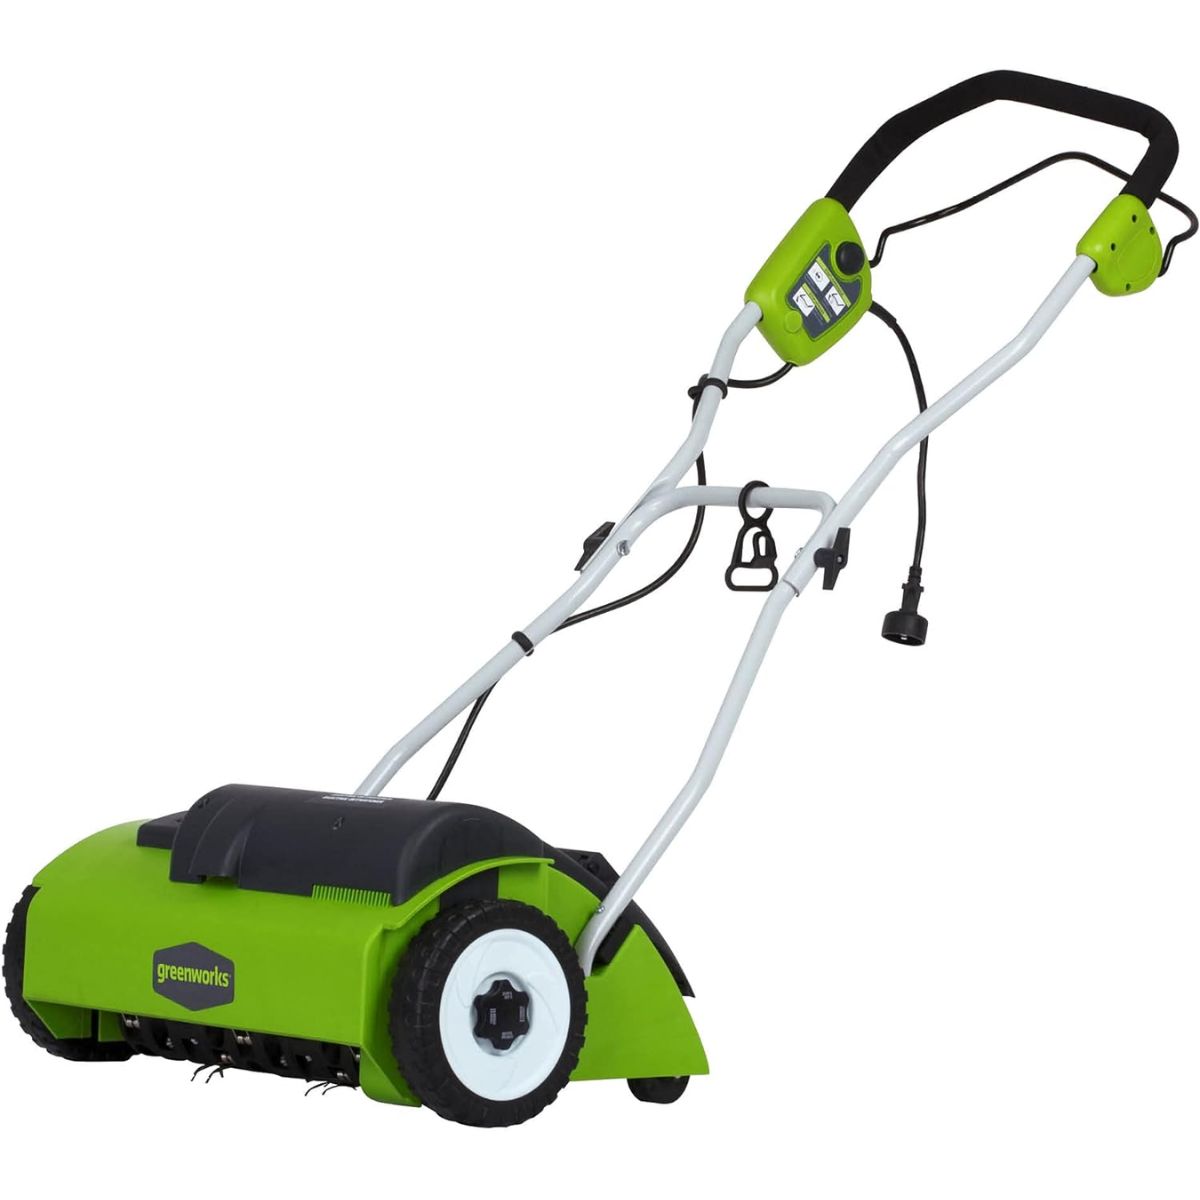 Greenworks 14-Inch Corded Dethatcher on a white background